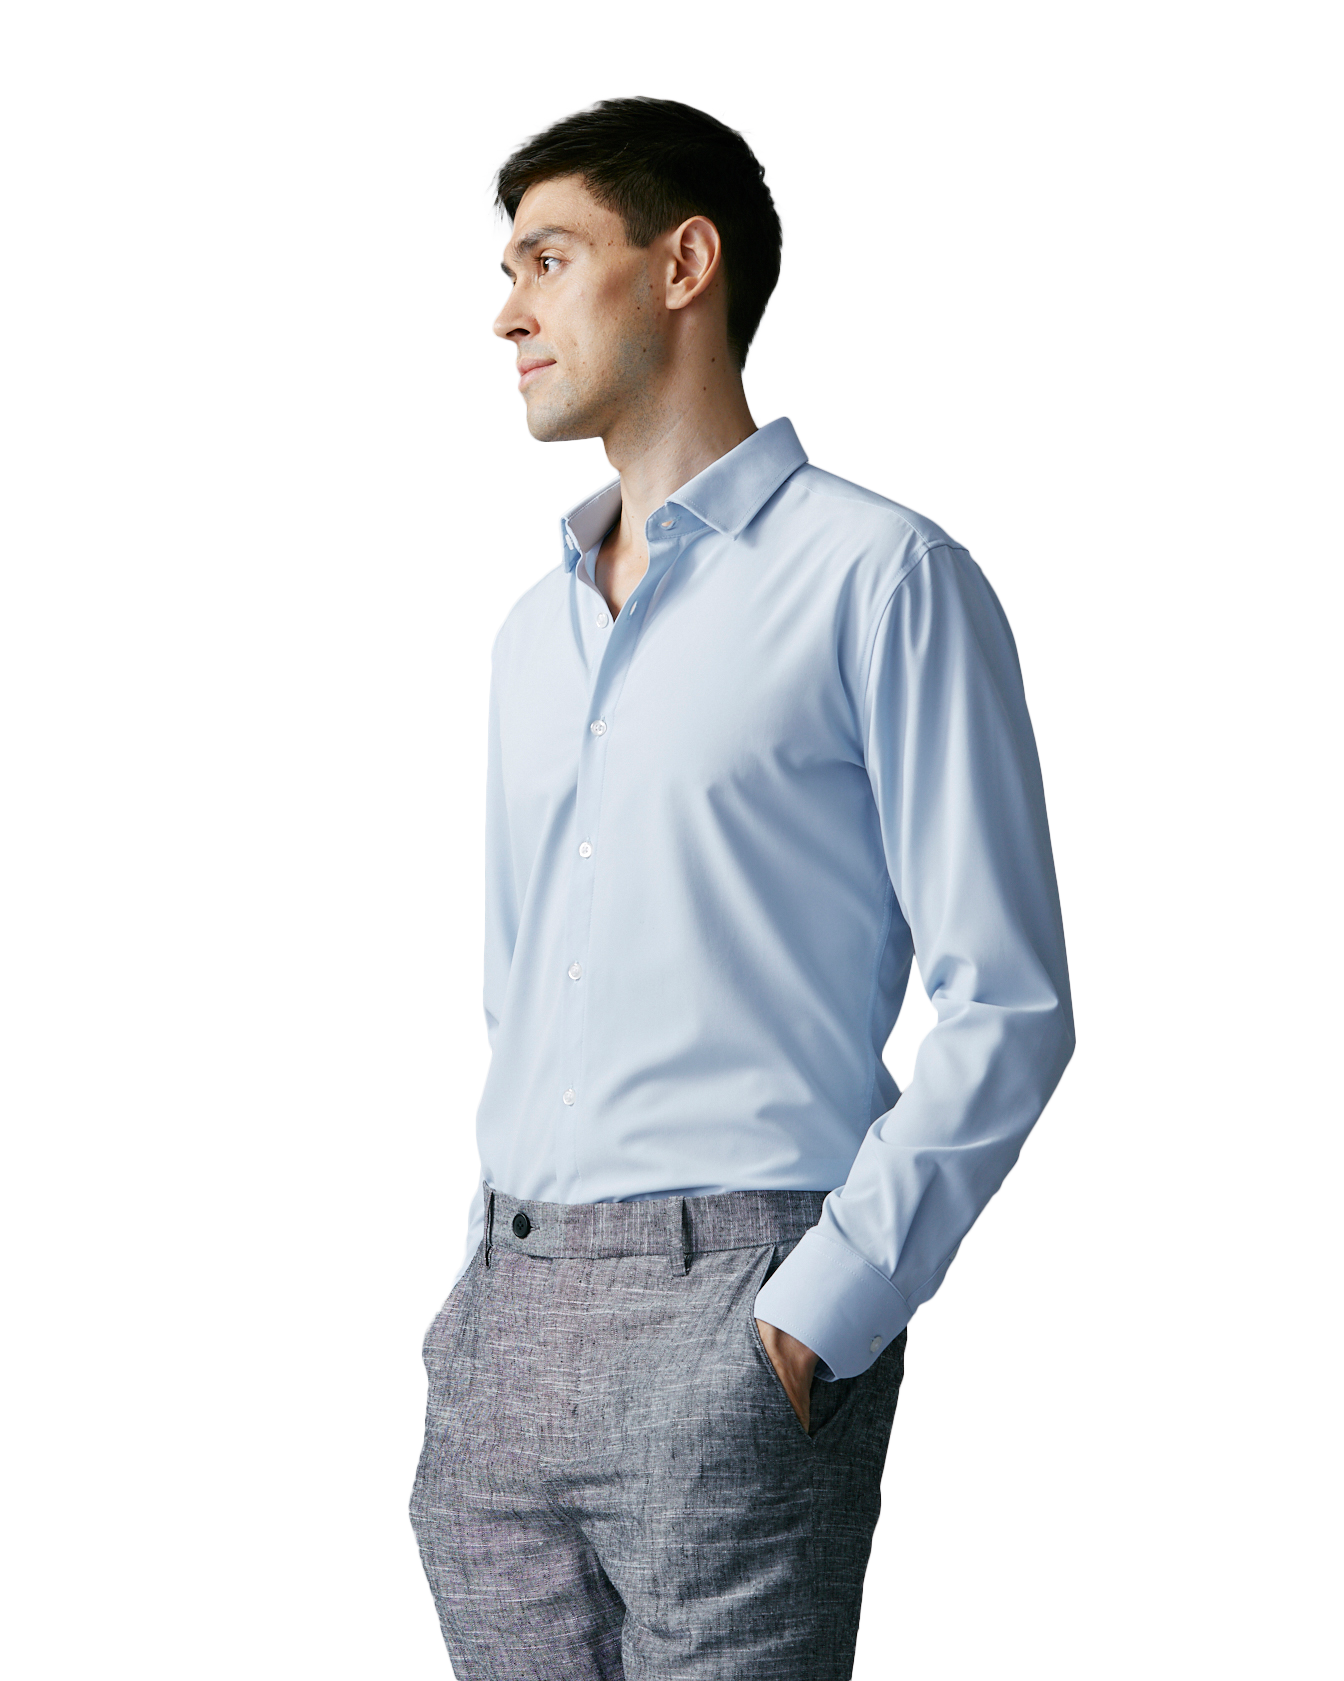 Performance Dress Shirts for Men – Moisture Wicking, Wrinkle Free M / Premium Men's Apparel by All Citizens | Cherries (ON Gray)